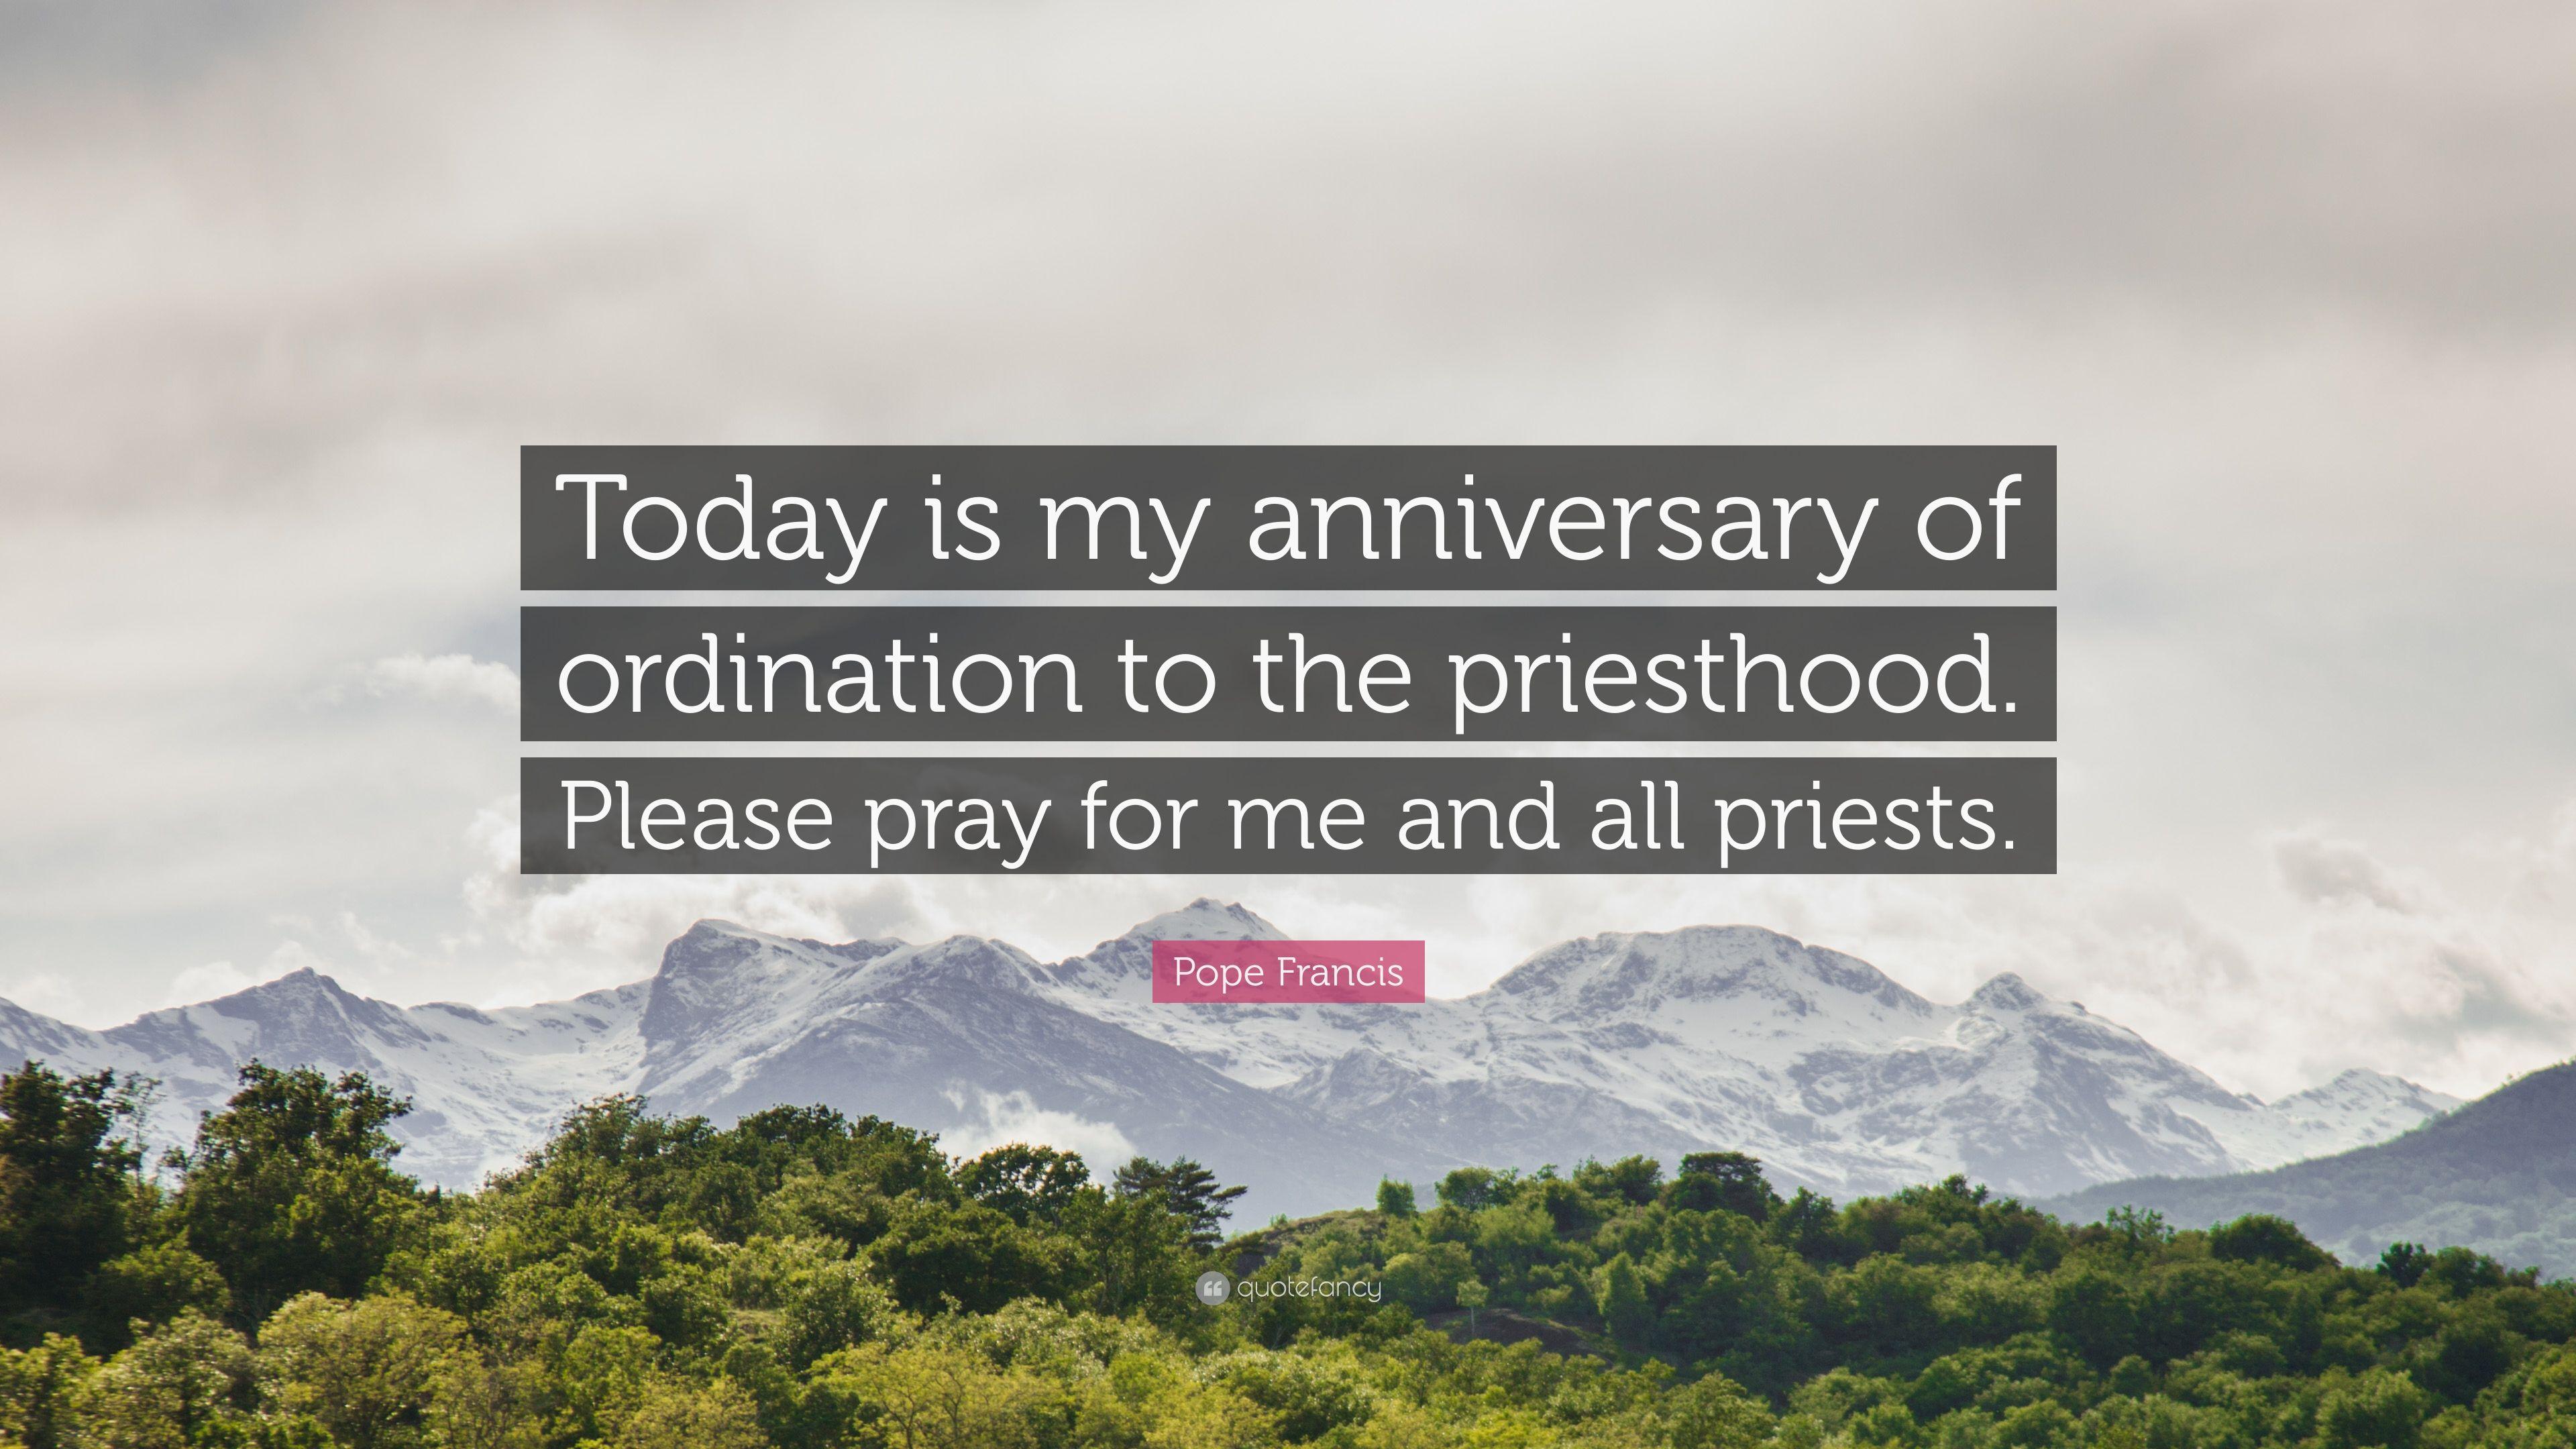 Pope Francis Quote: “Today is my anniversary of ordination to